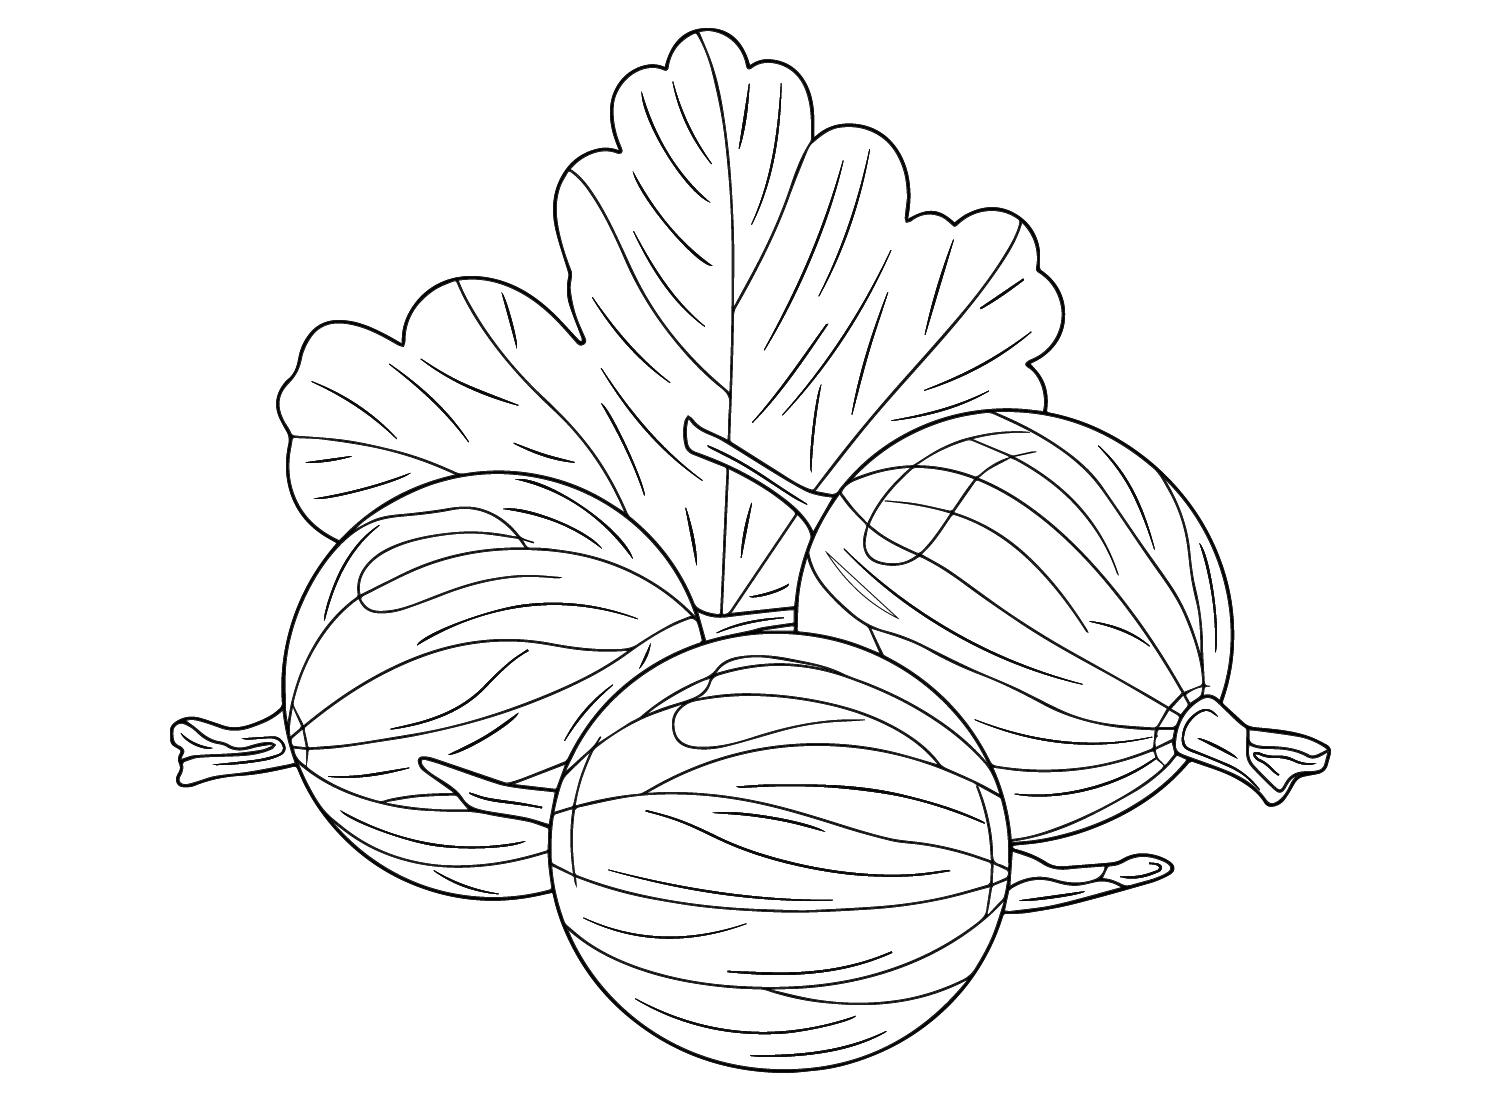 Gooseberry for Kids Coloring Page